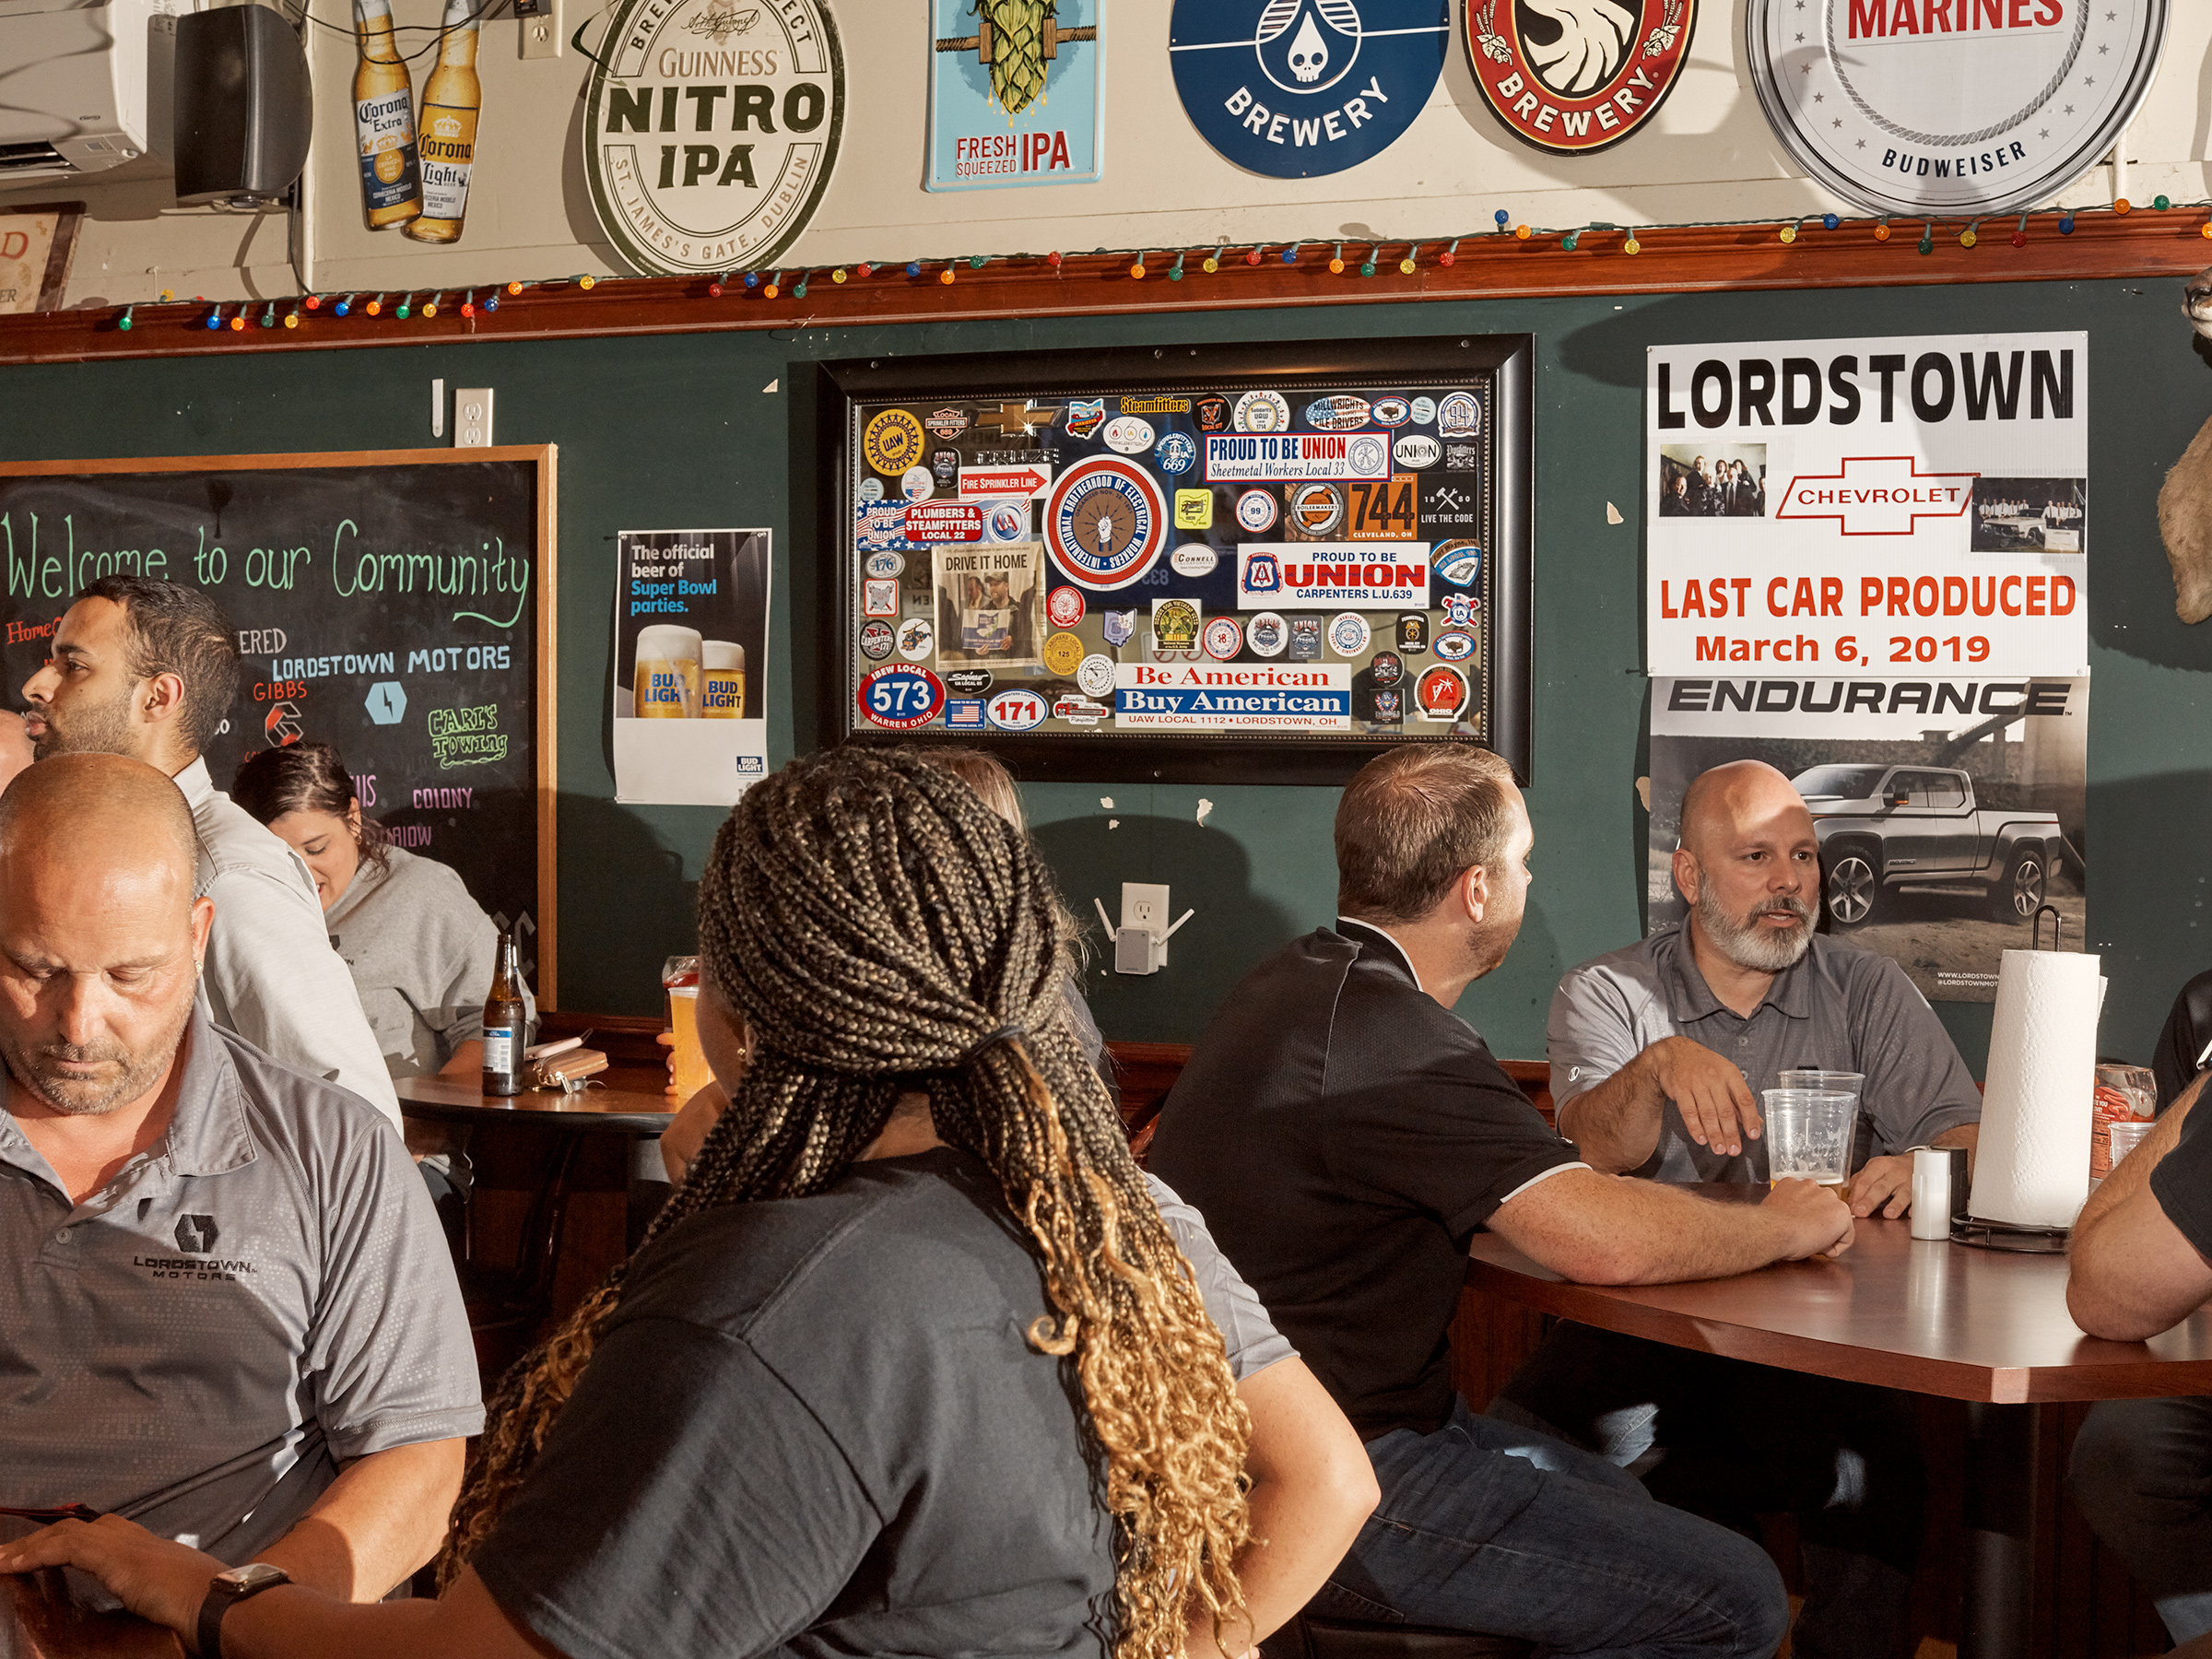 Lordstown Motors employees gather after work at Ross’ Eatery & Pub